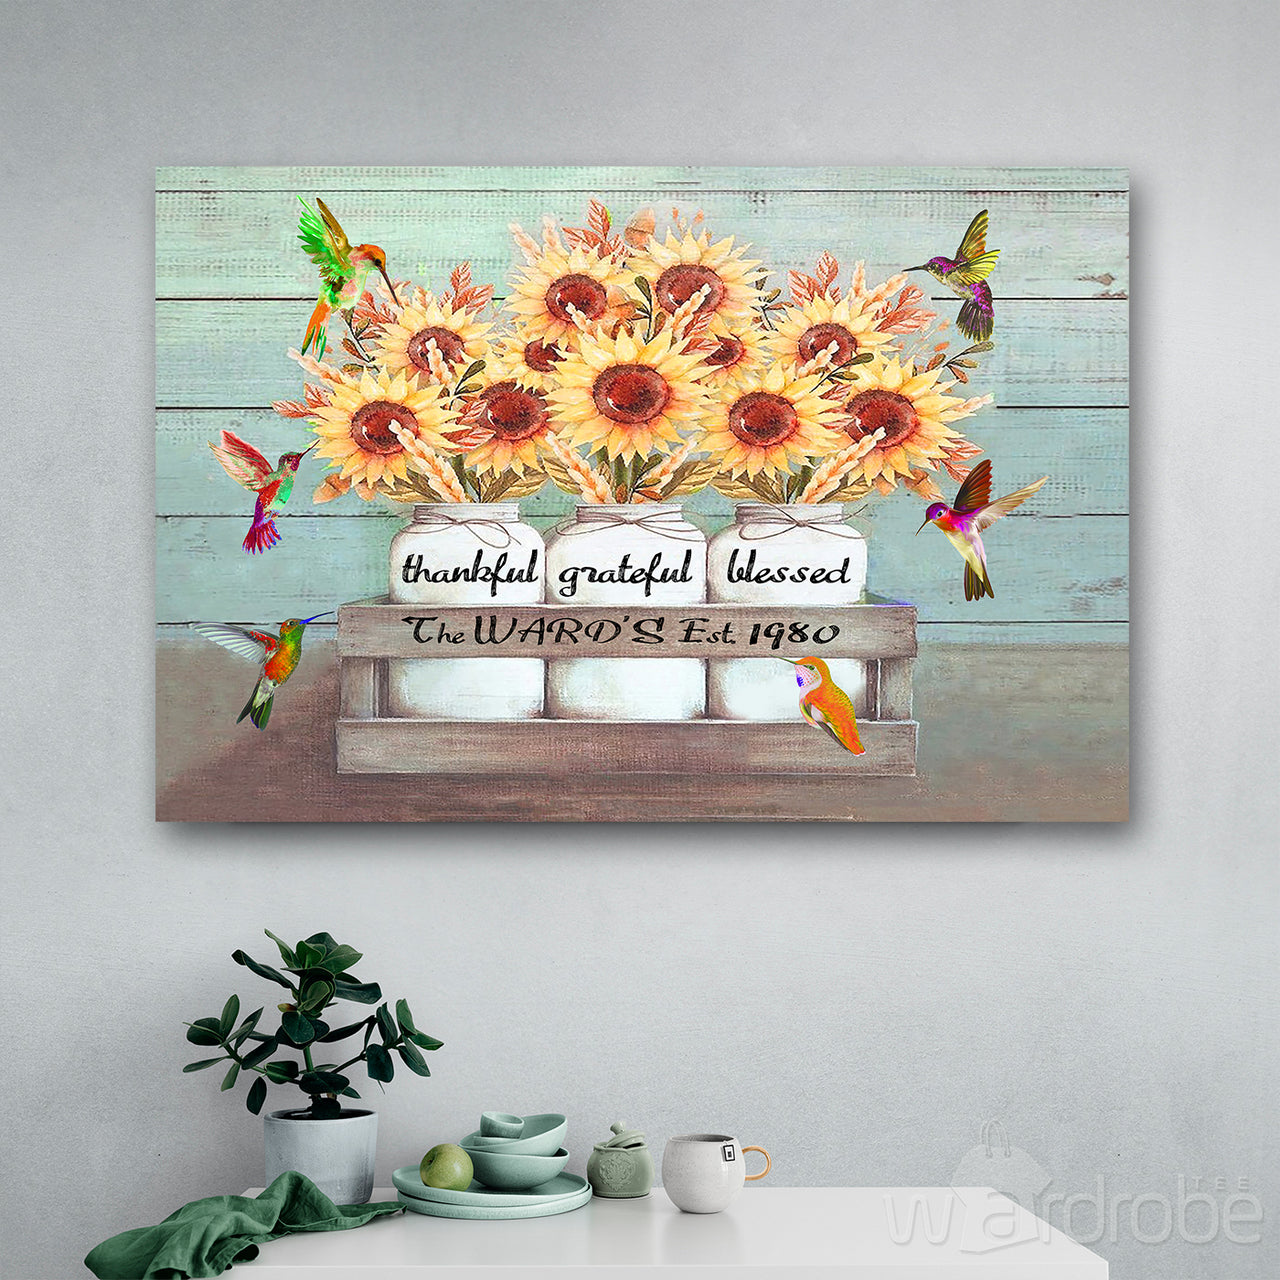 Personalized Family Name & Year Hummingbird Thankful, Grateful, Blessed Canvas Print Wall Art - Matte Canvas